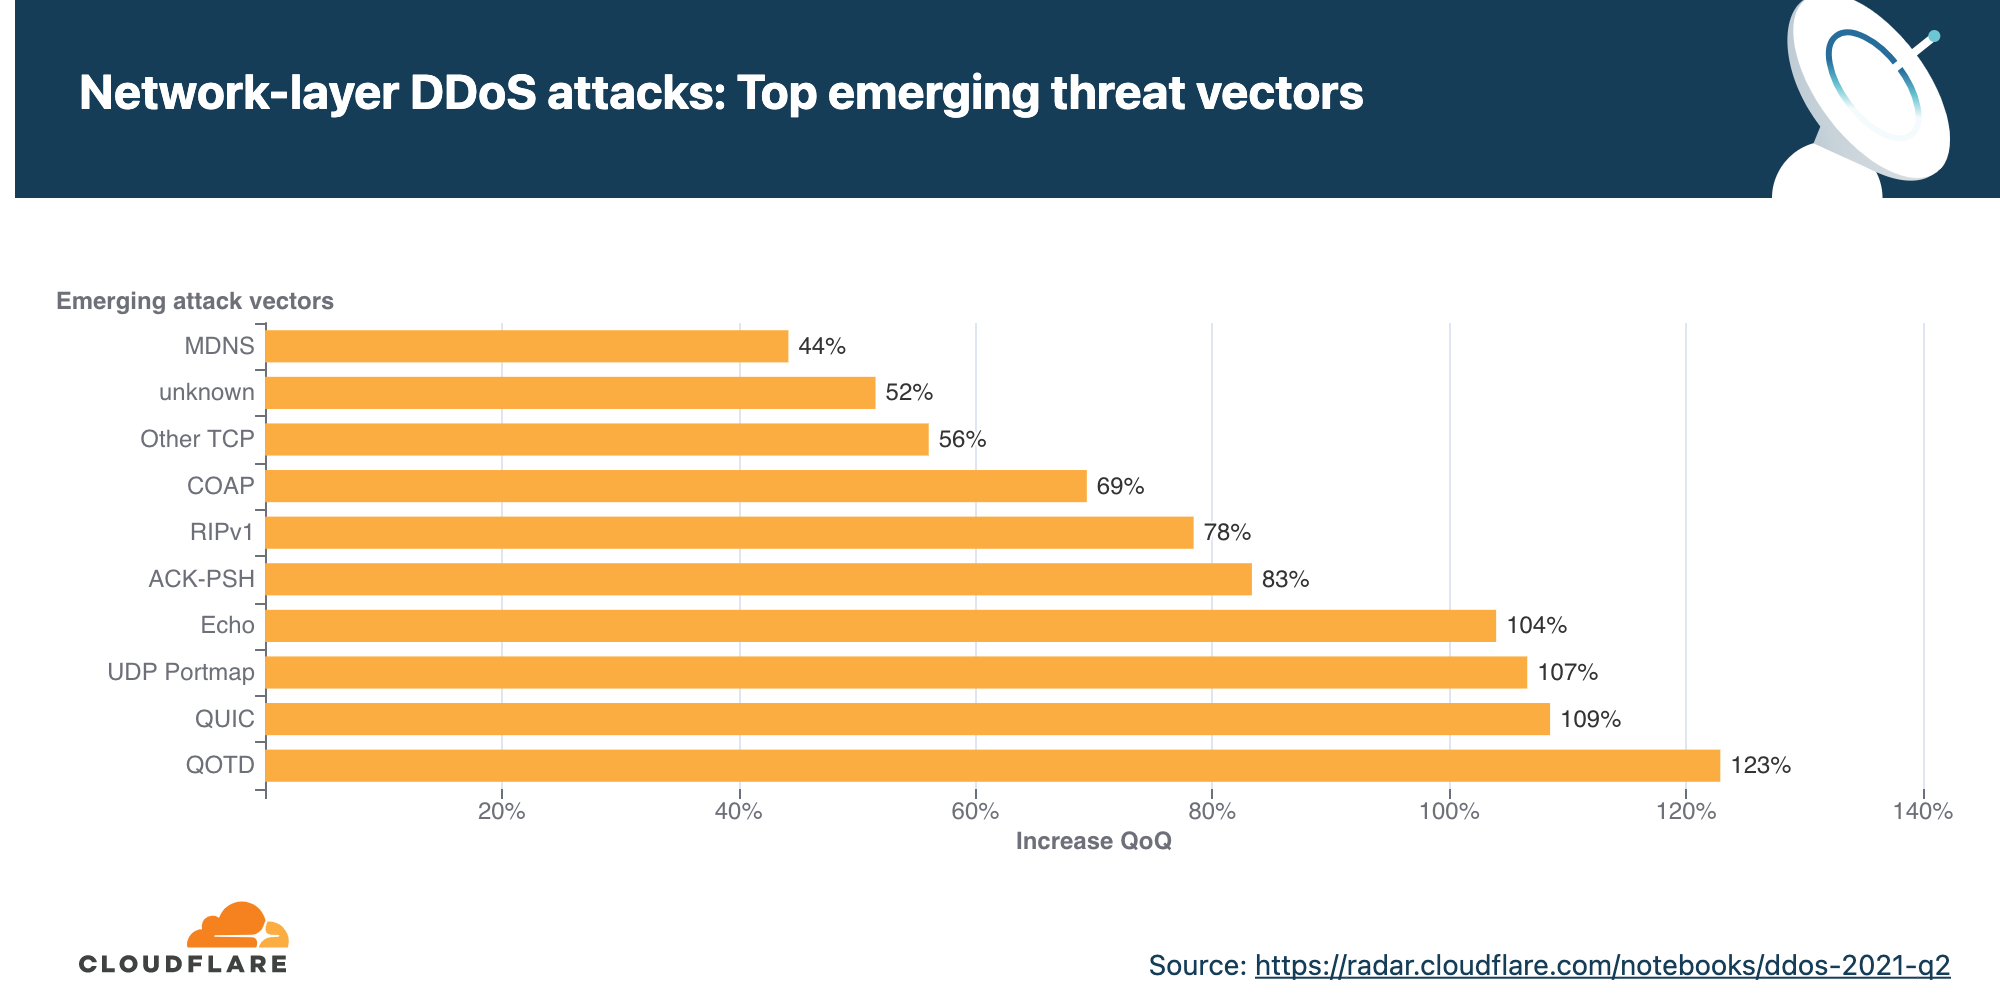 The chart above shows the distribution of network-layer DDoS attacks in 2021 Q2.